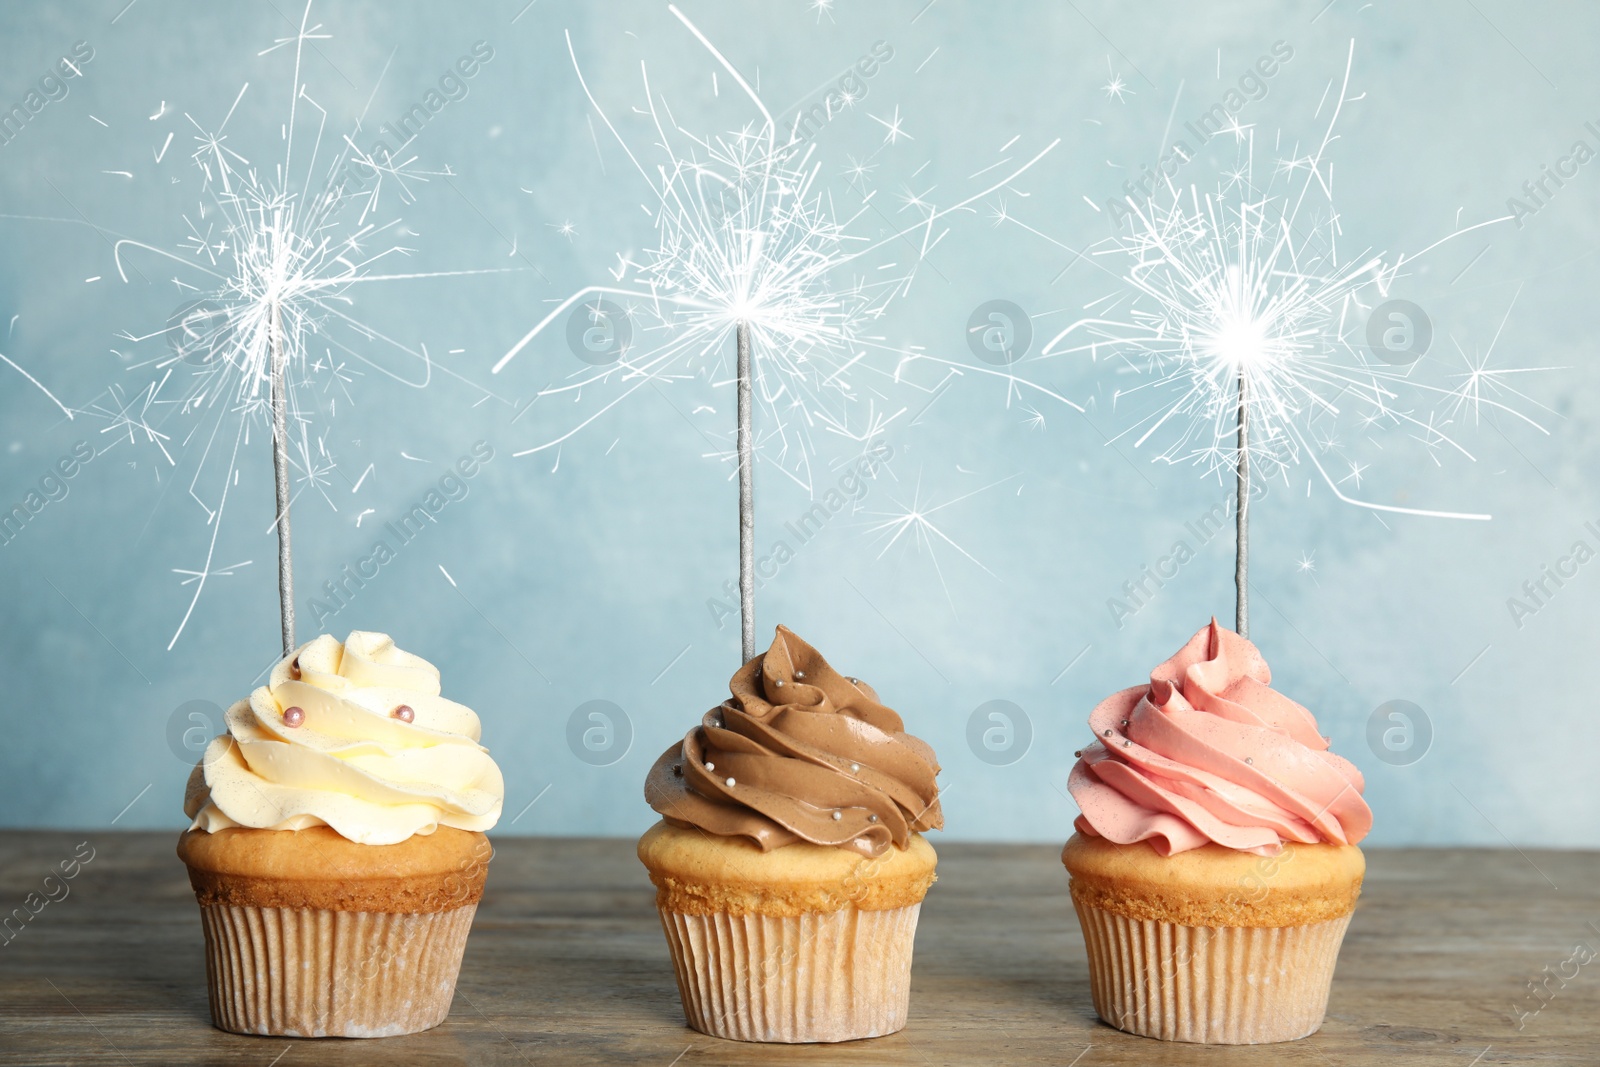 Image of Birthday cupcakes with sparklers on wooden table against light blue background